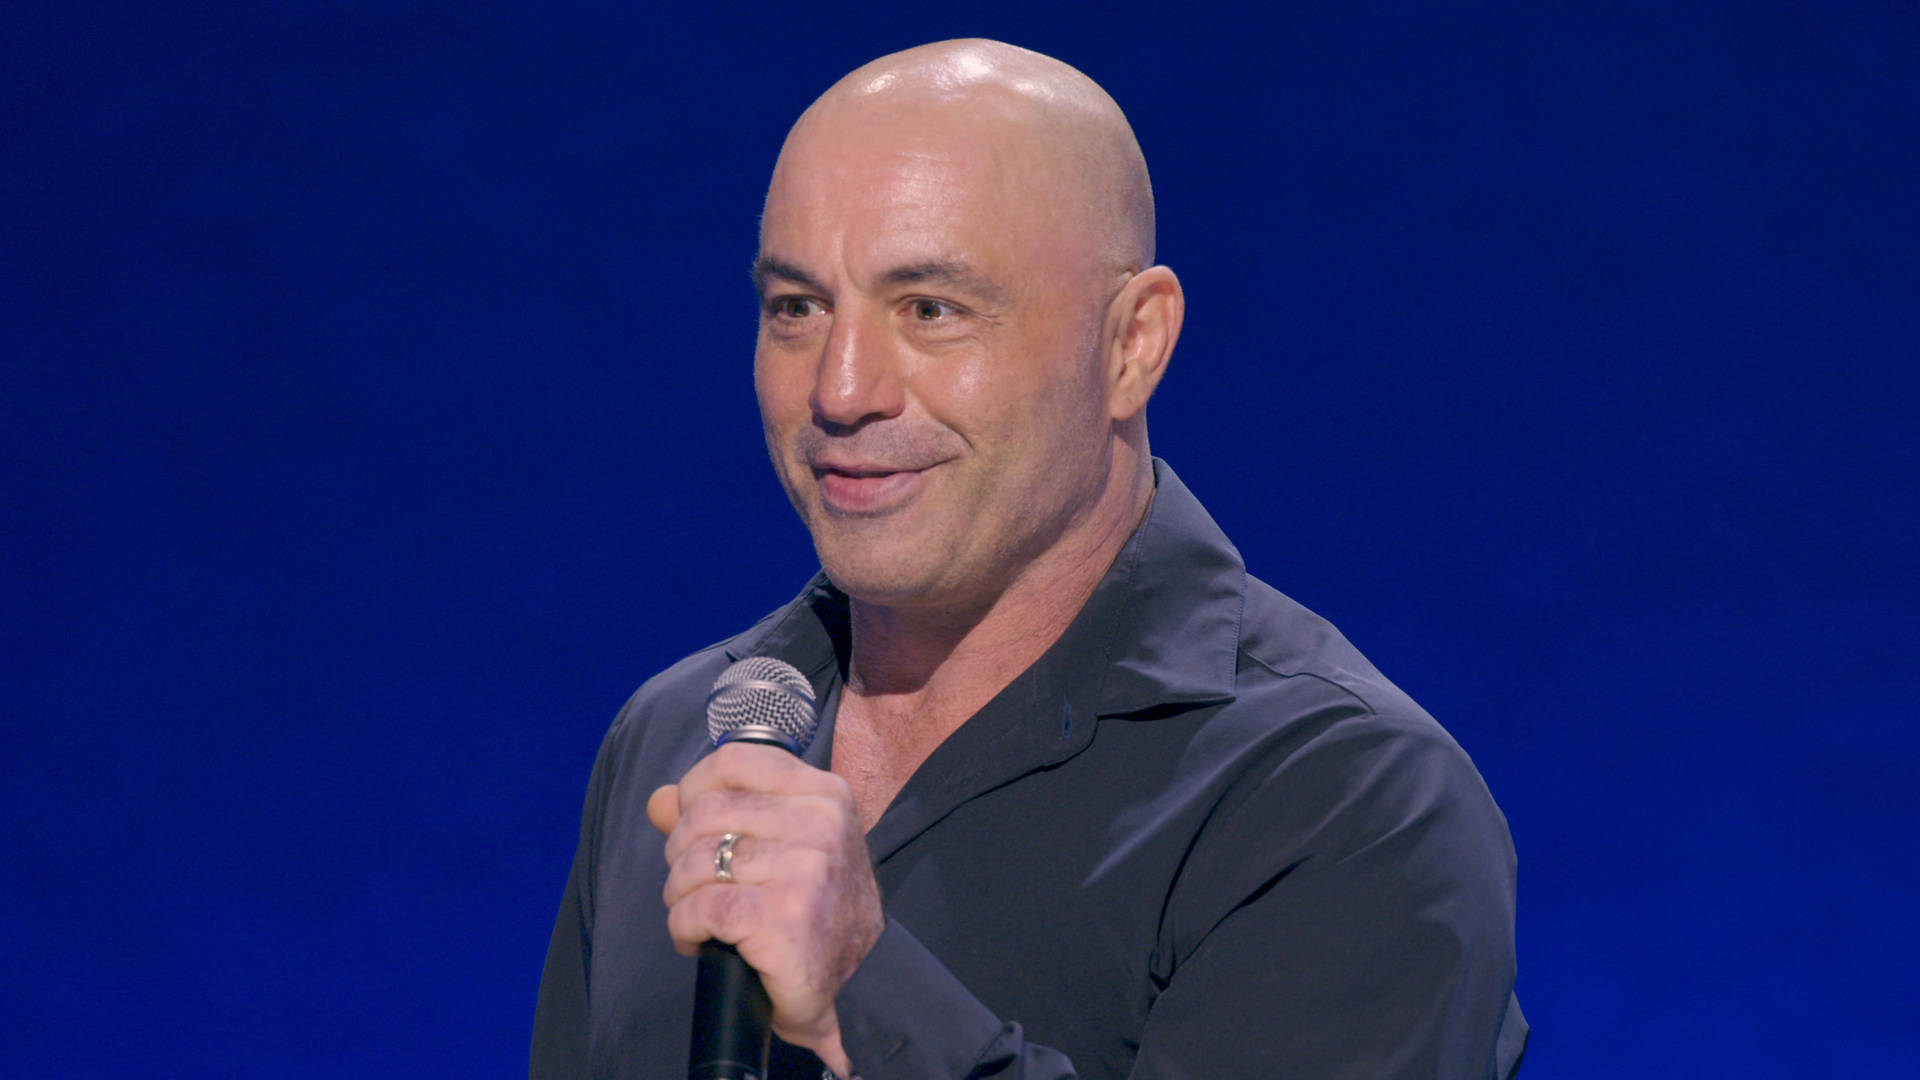 Joe Rogan Intensely Performing Stand-up Comedy Wallpaper